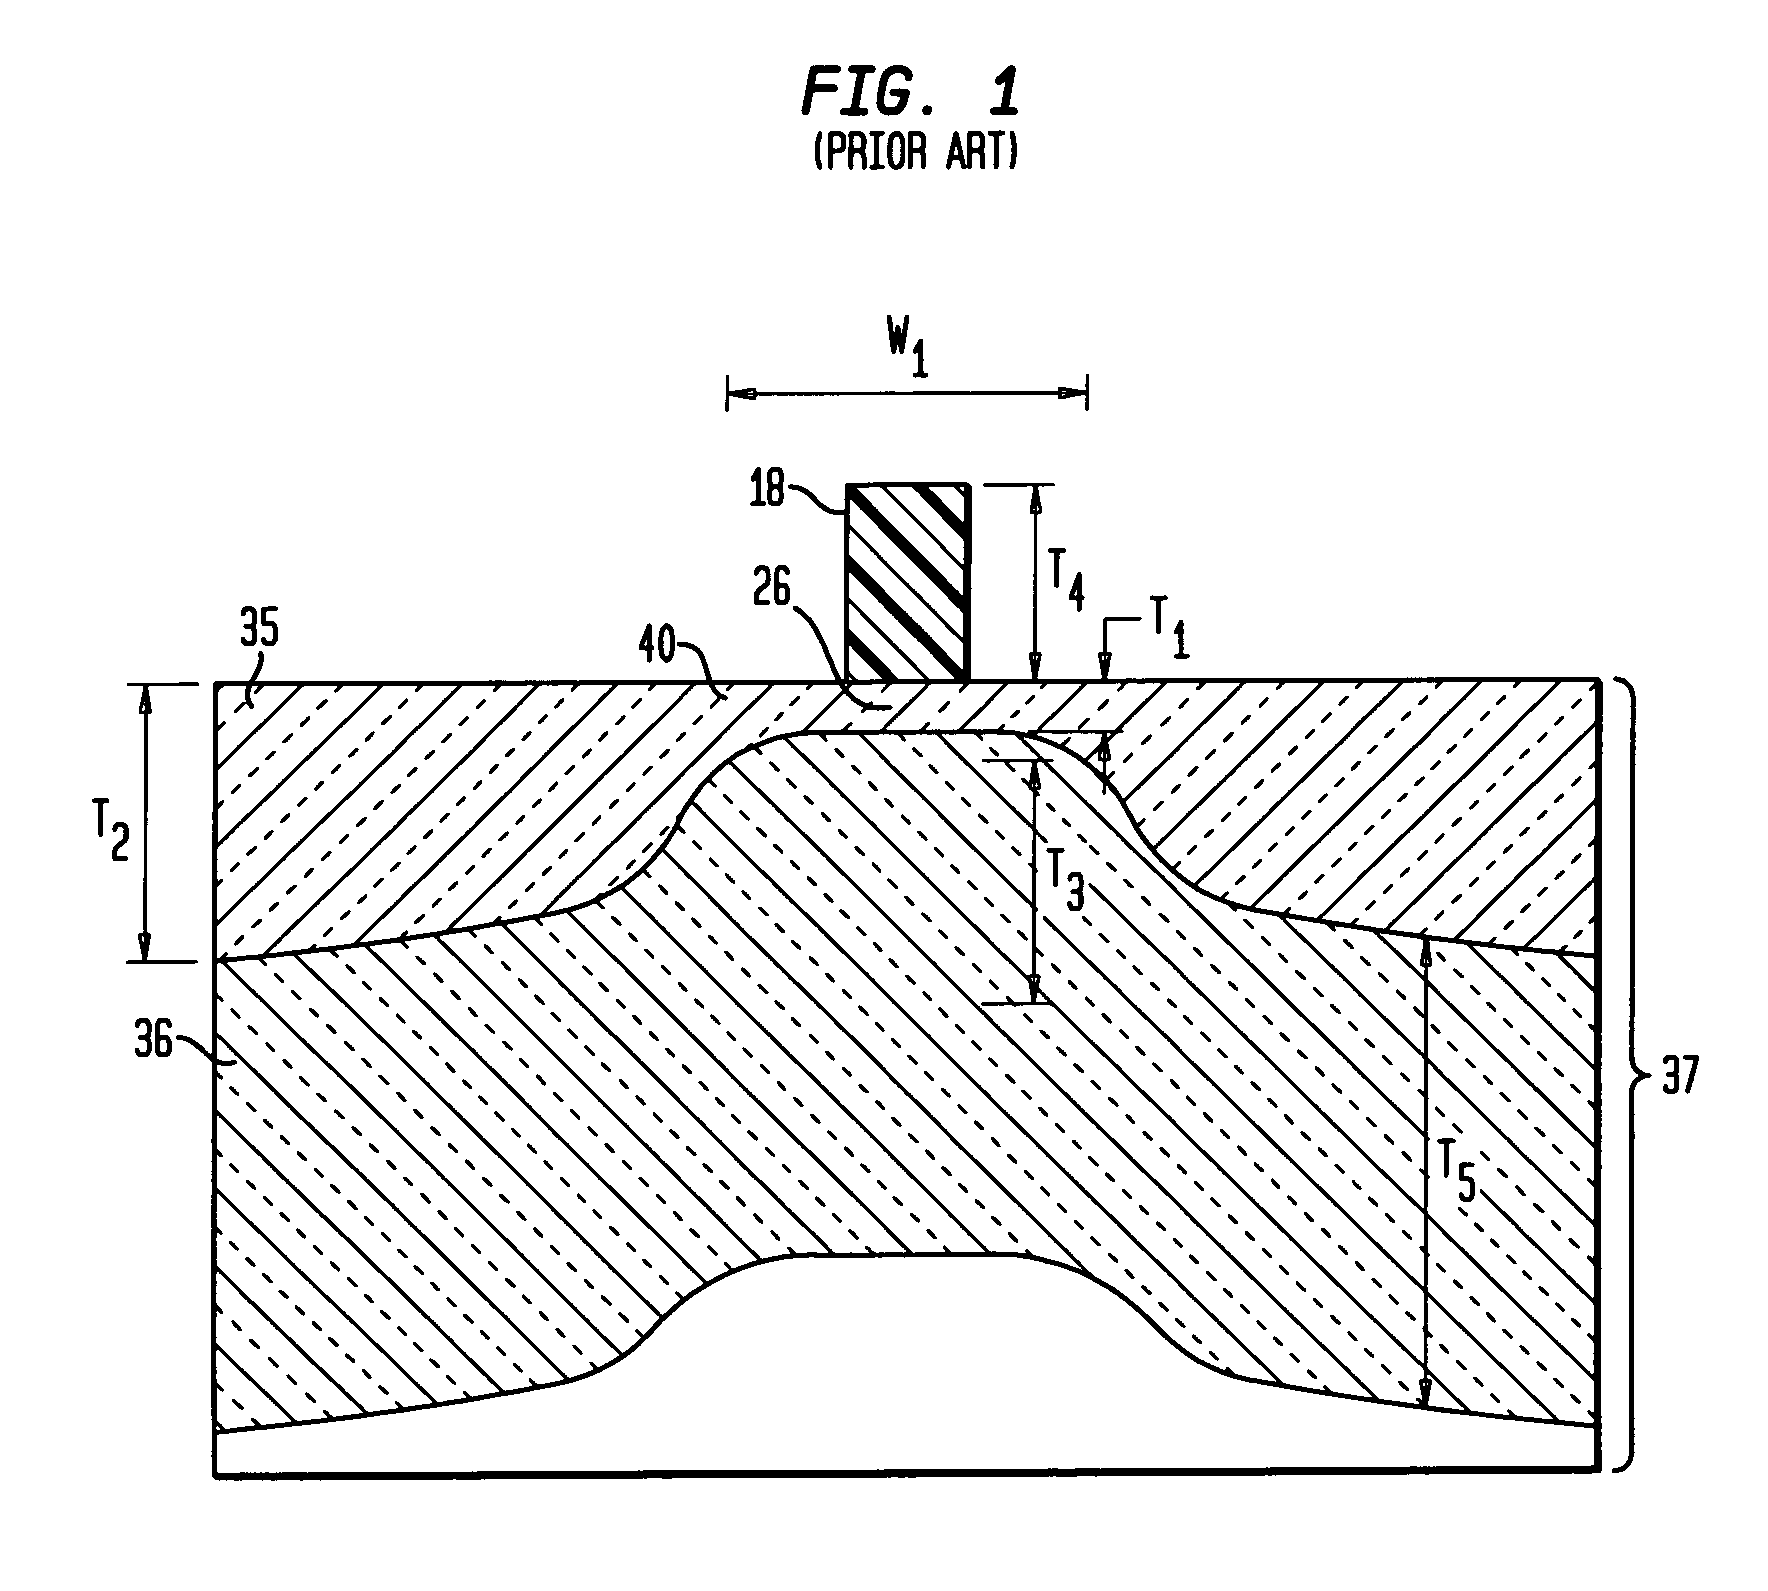 Ultra-thin Si MOSFET device structure and method of manufacture